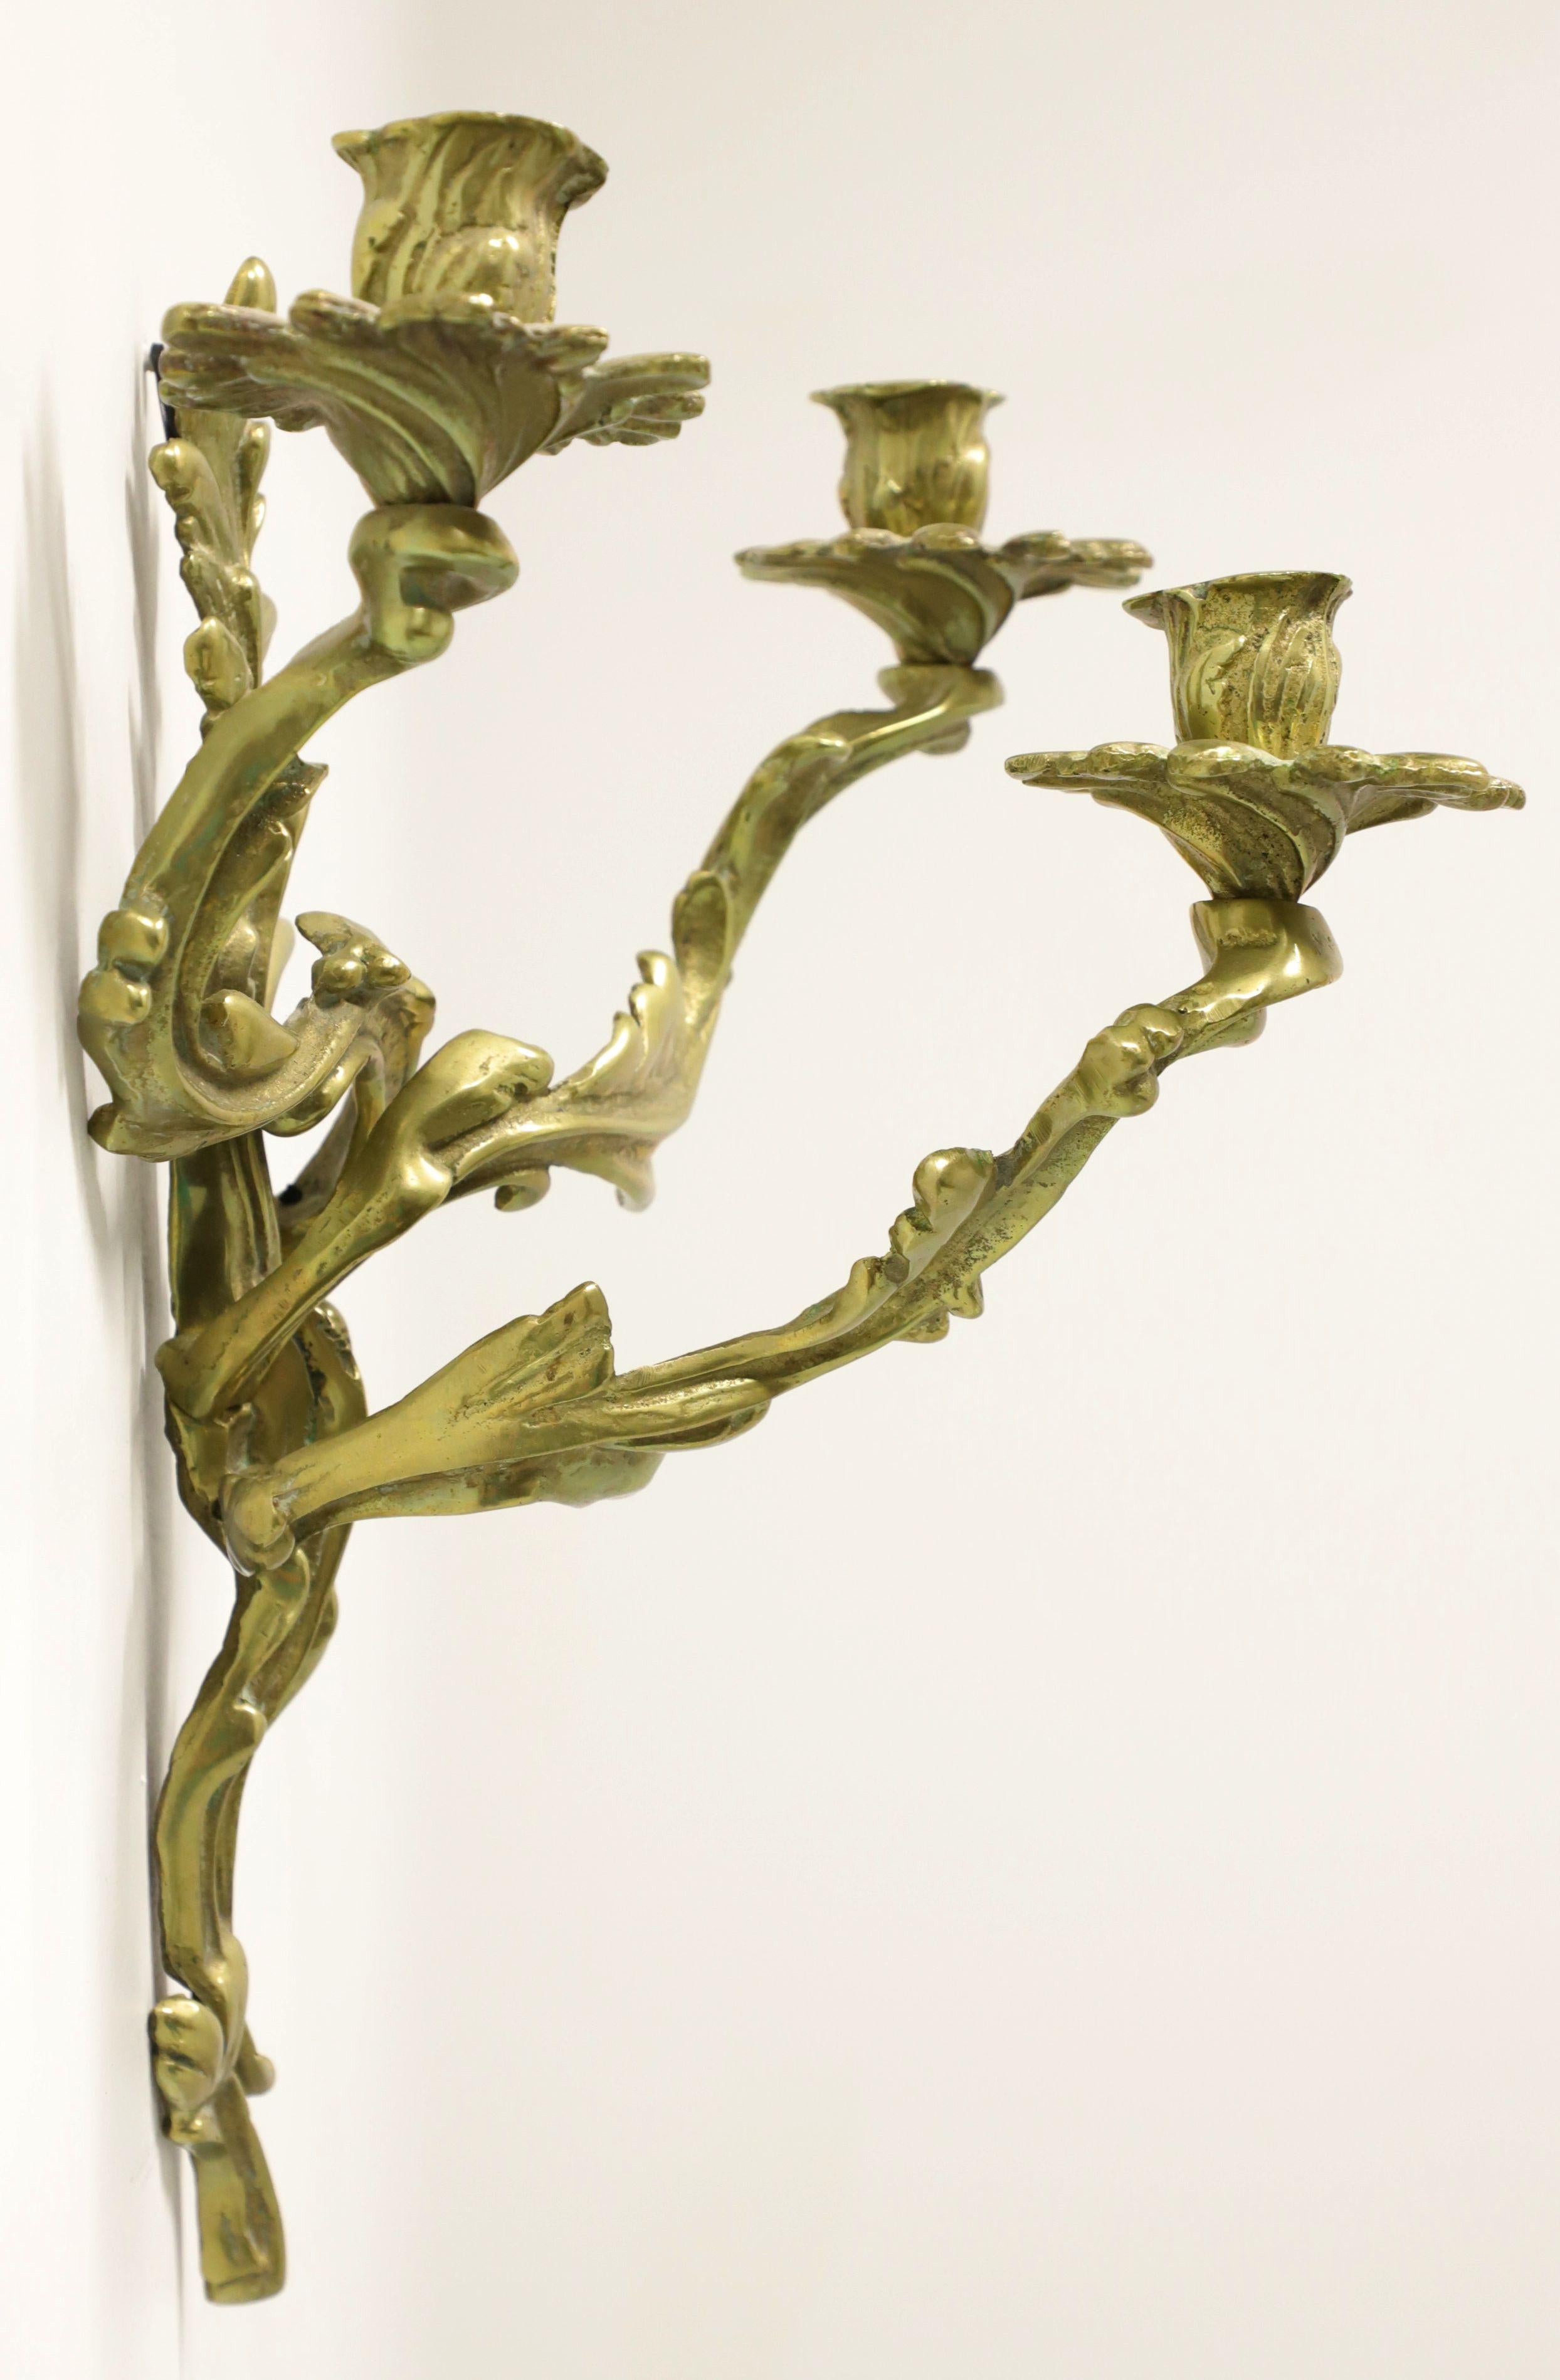 American Antique 1920's Solid Brass Rococo Style Candle Wall Sconce For Sale